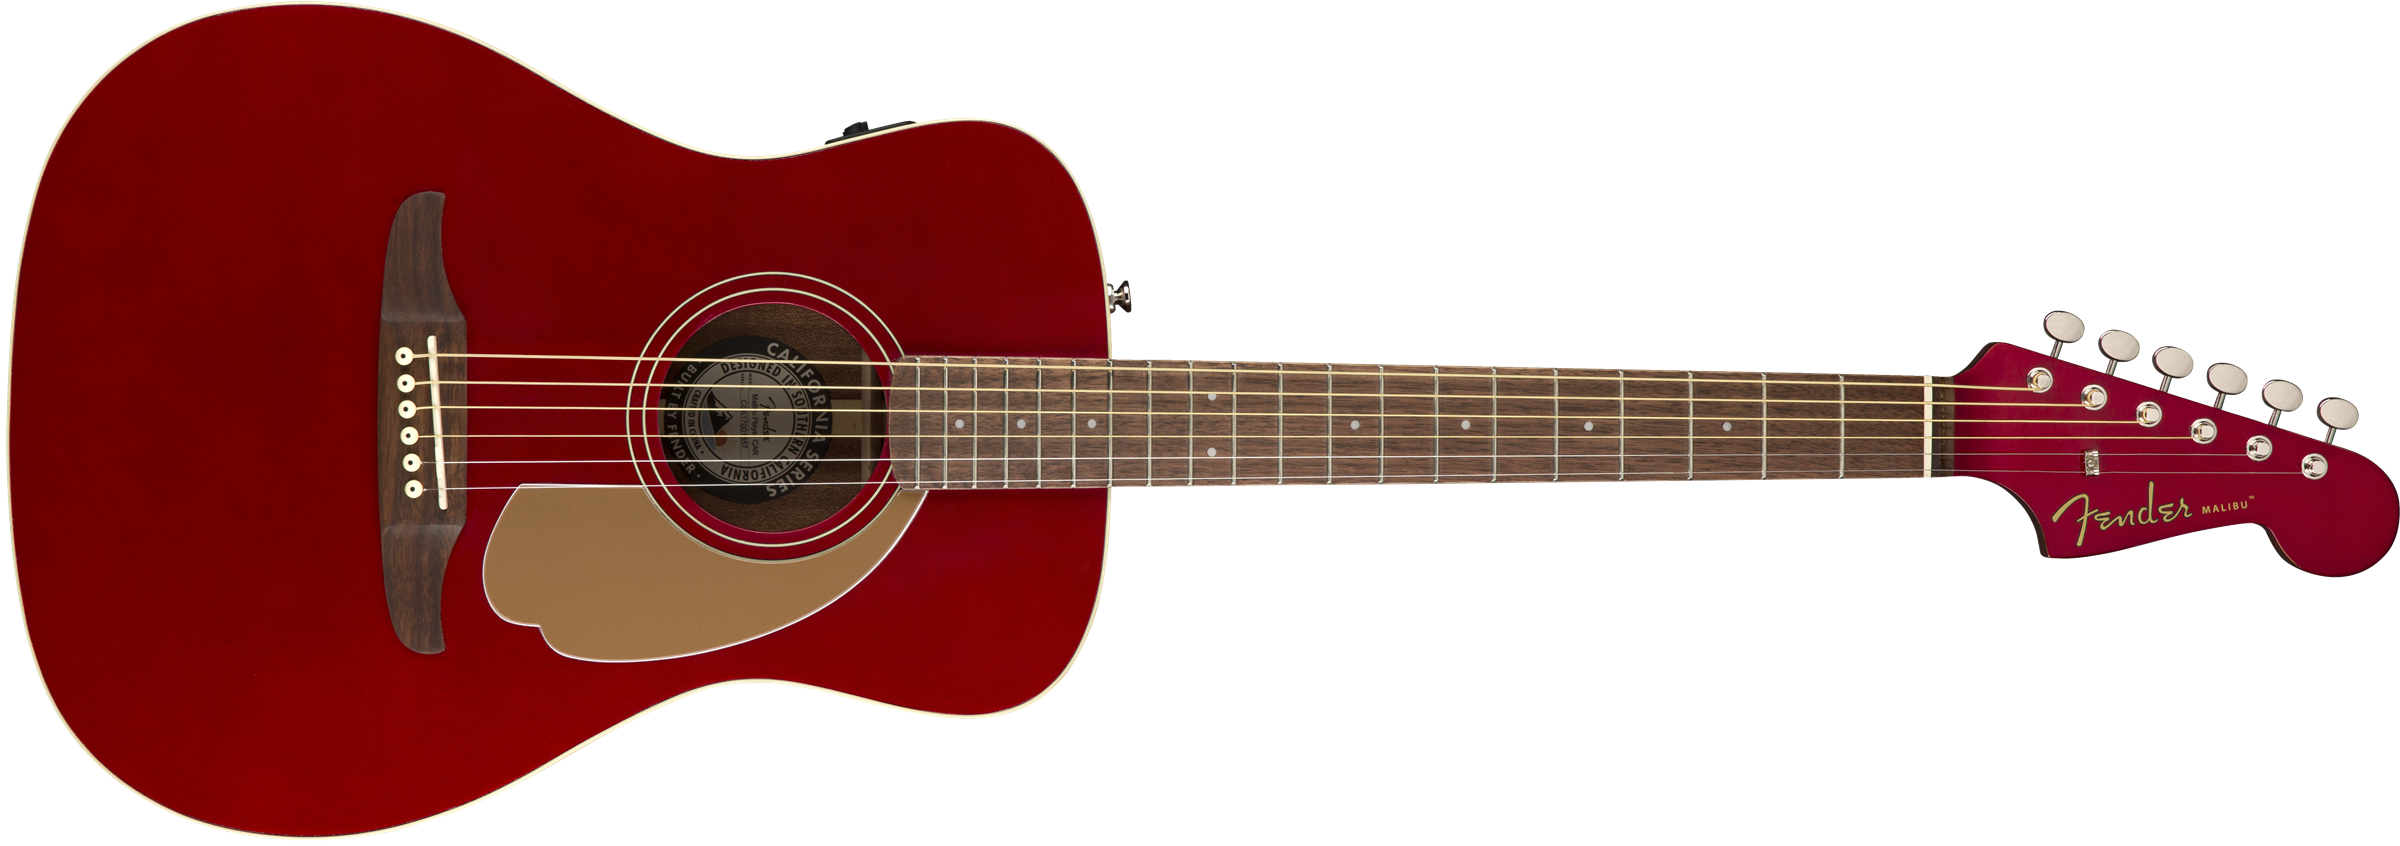 Fender Malibu Player - Candy Apple Red - Acoustic guitar & electro - Variation 1